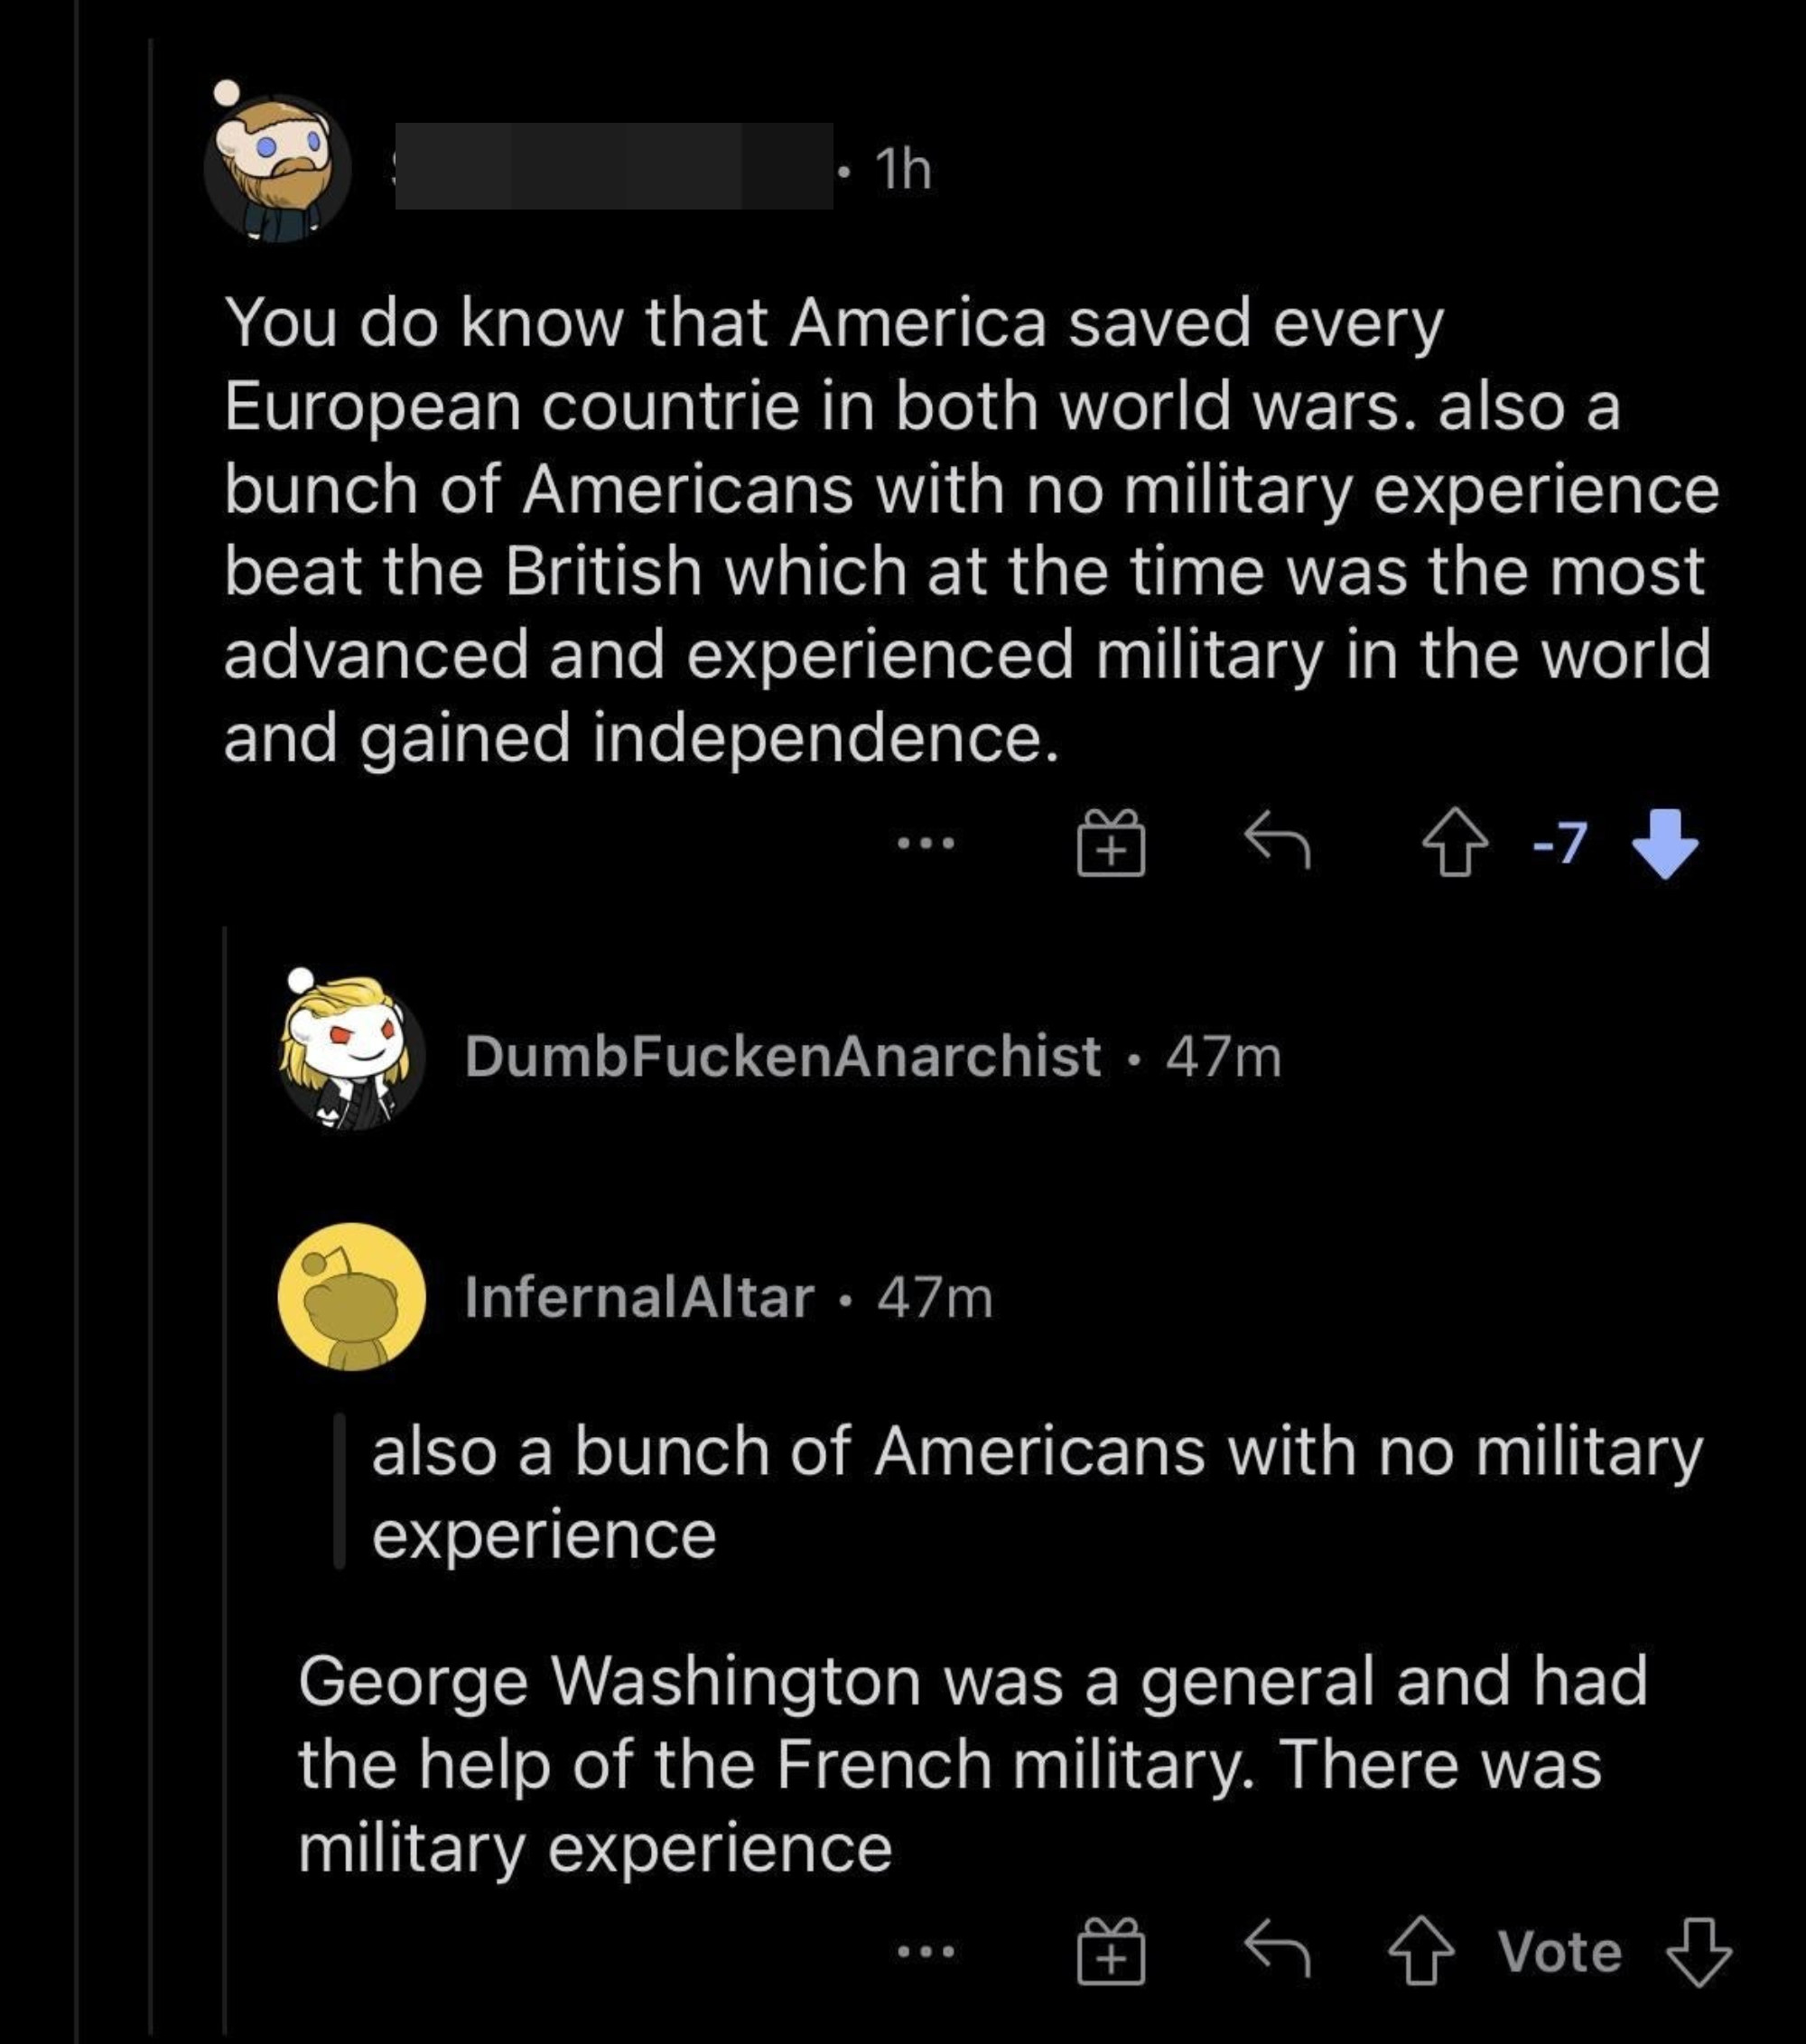 Person who says the Revolutionary War was fought by people without military experience, and someone points out that George Washington was a general and had help from the French military